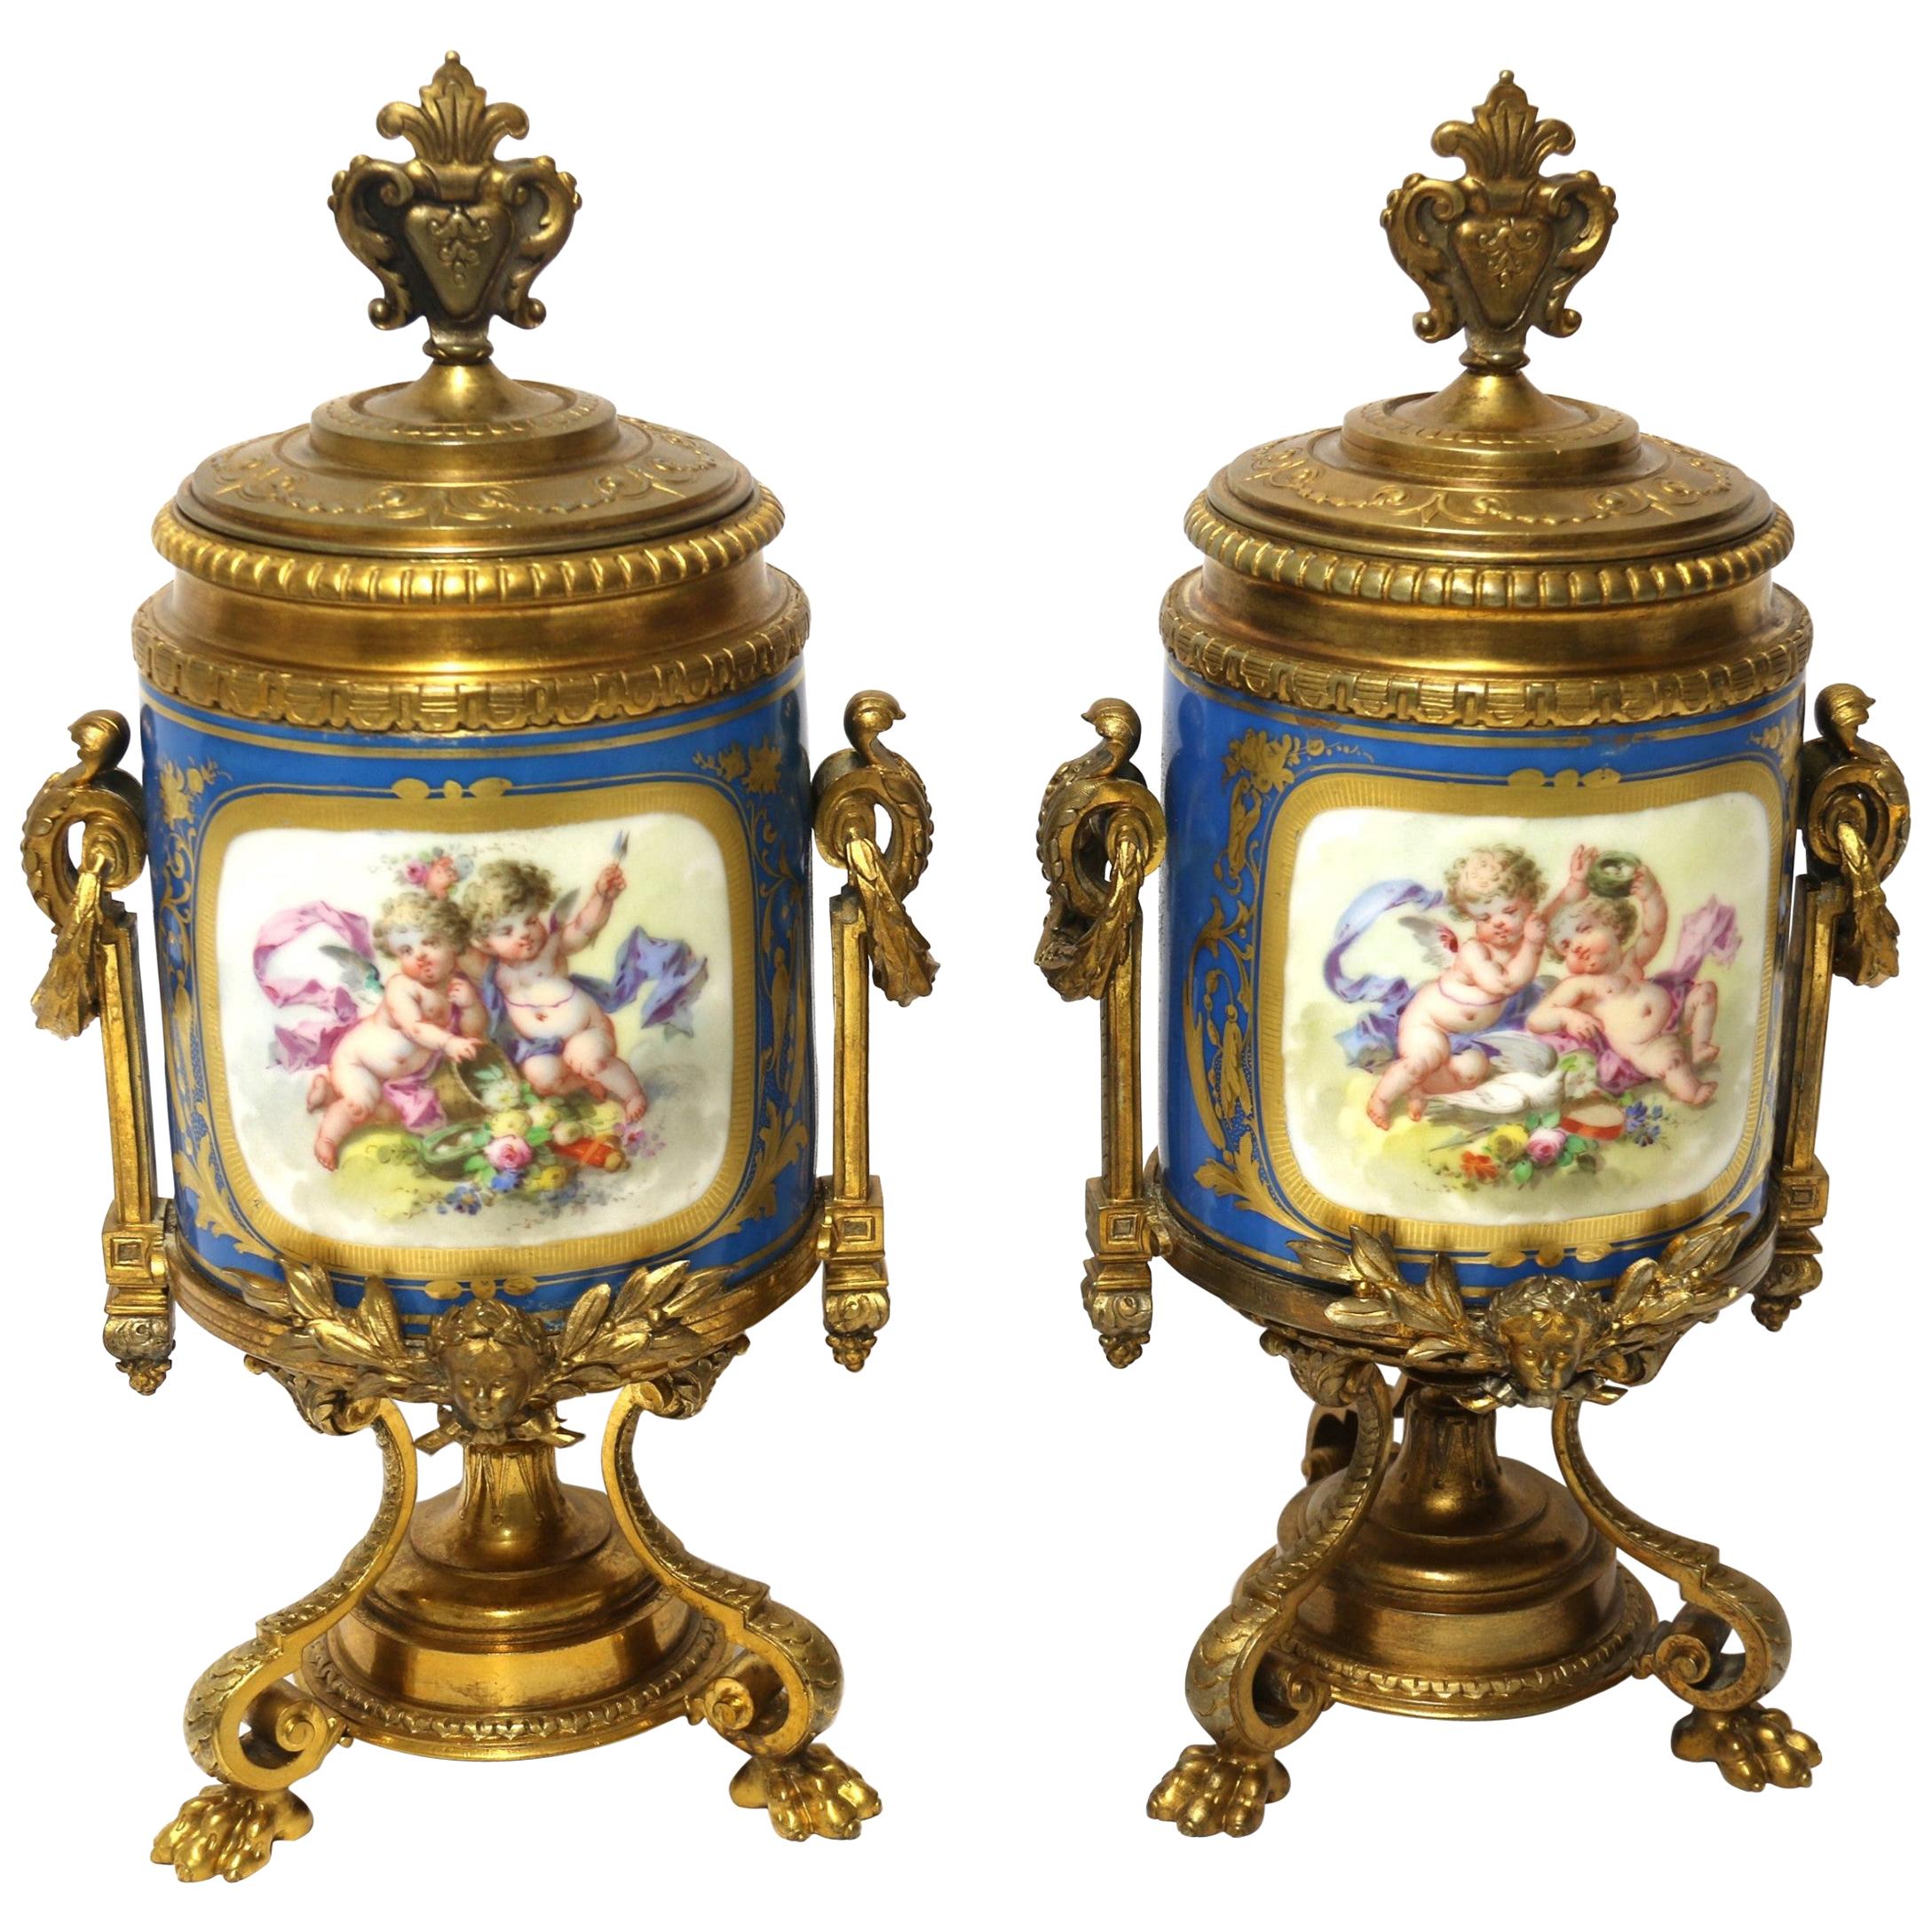 19th Century Pair of French Sèvres Style Hand Painted Porcelain and Ormolu Urns